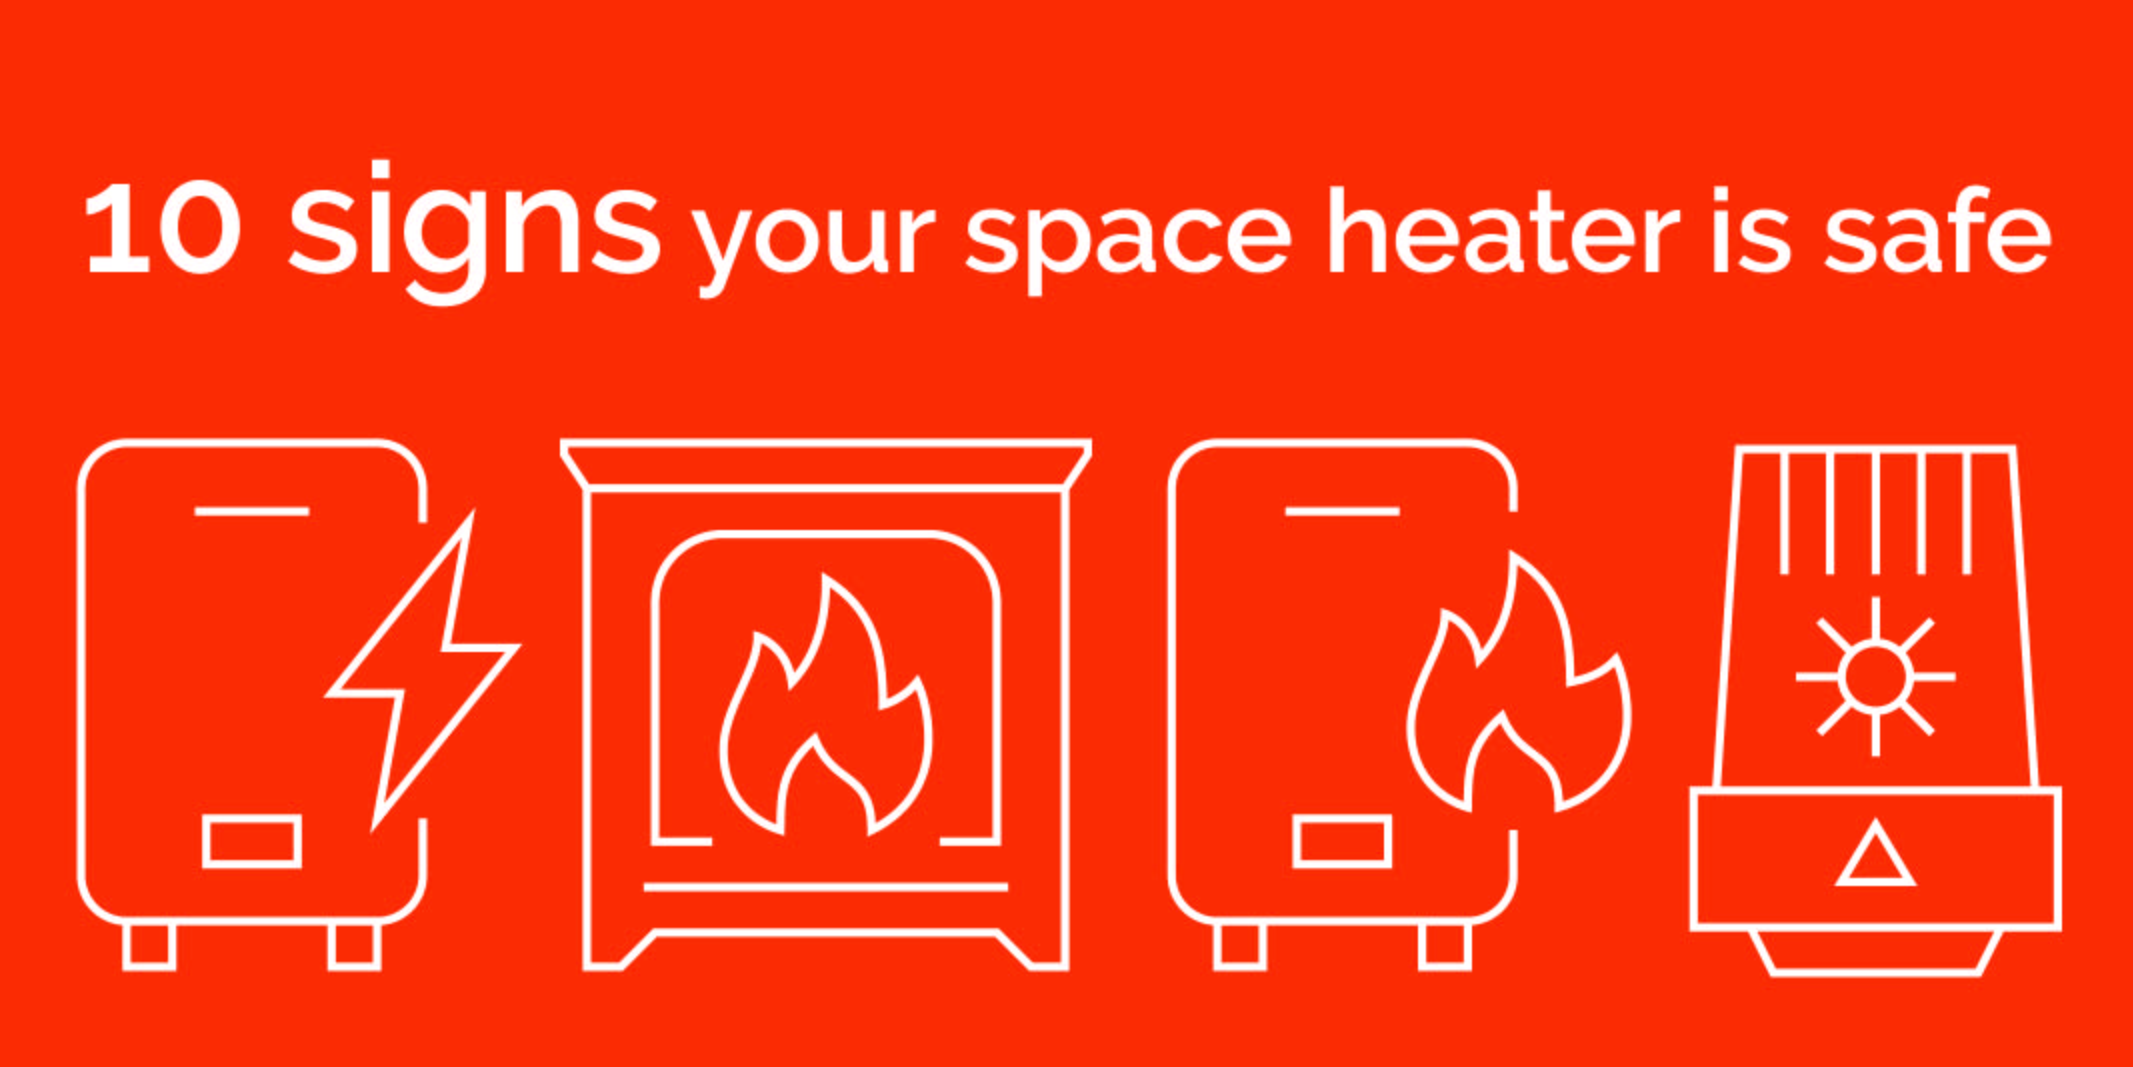 10 tips for space heater safety